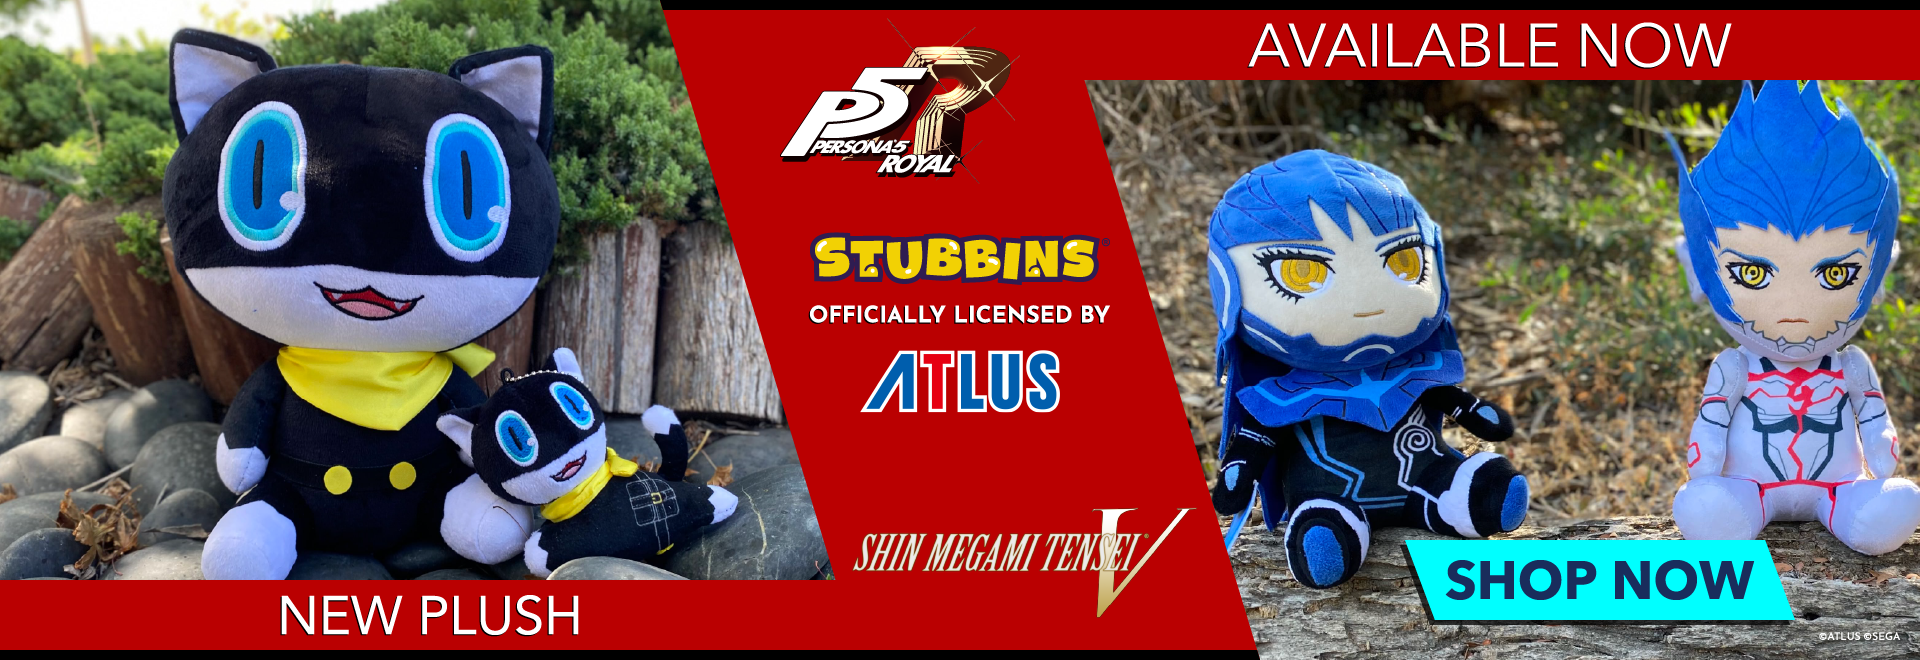 NEW Stubbins plush officially licensed by Atlus!